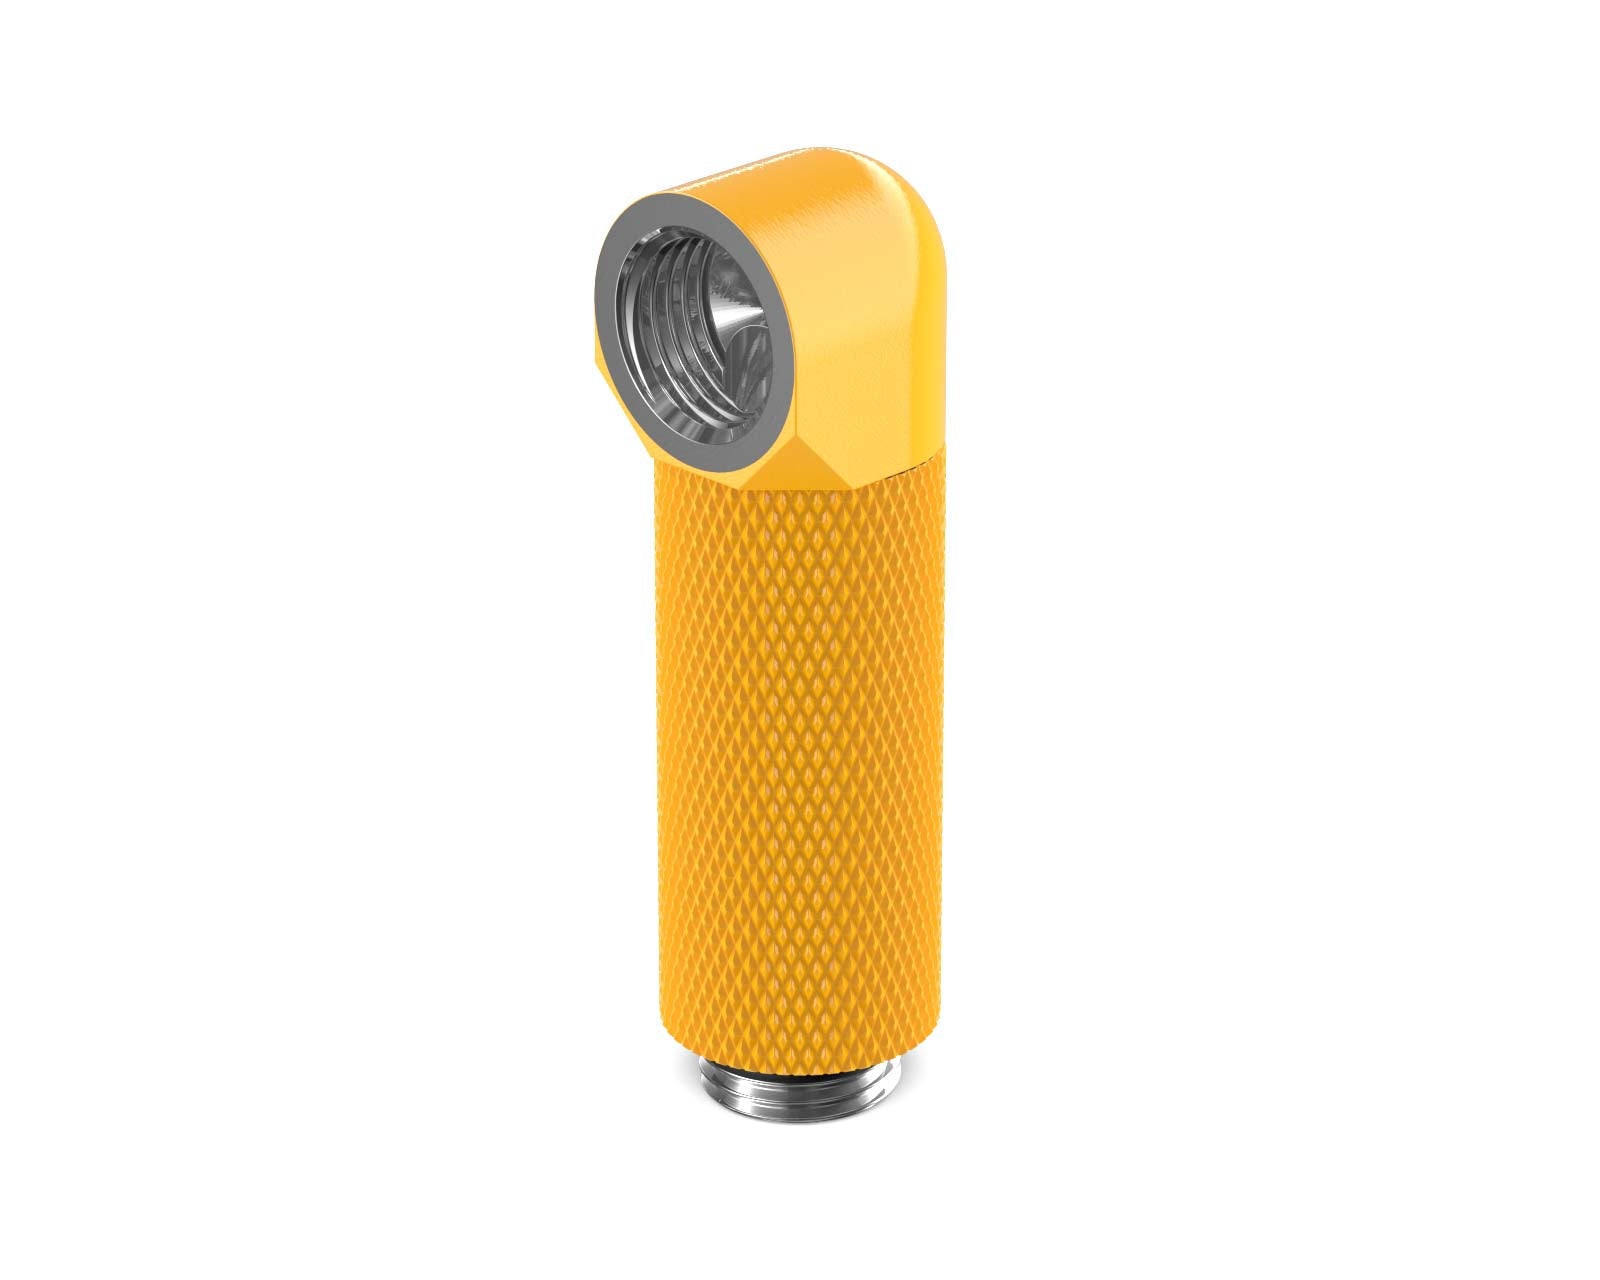 PrimoChill Male to Female G 1/4in. 90 Degree SX Rotary 40mm Extension Elbow Fitting - PrimoChill - KEEPING IT COOL Yellow